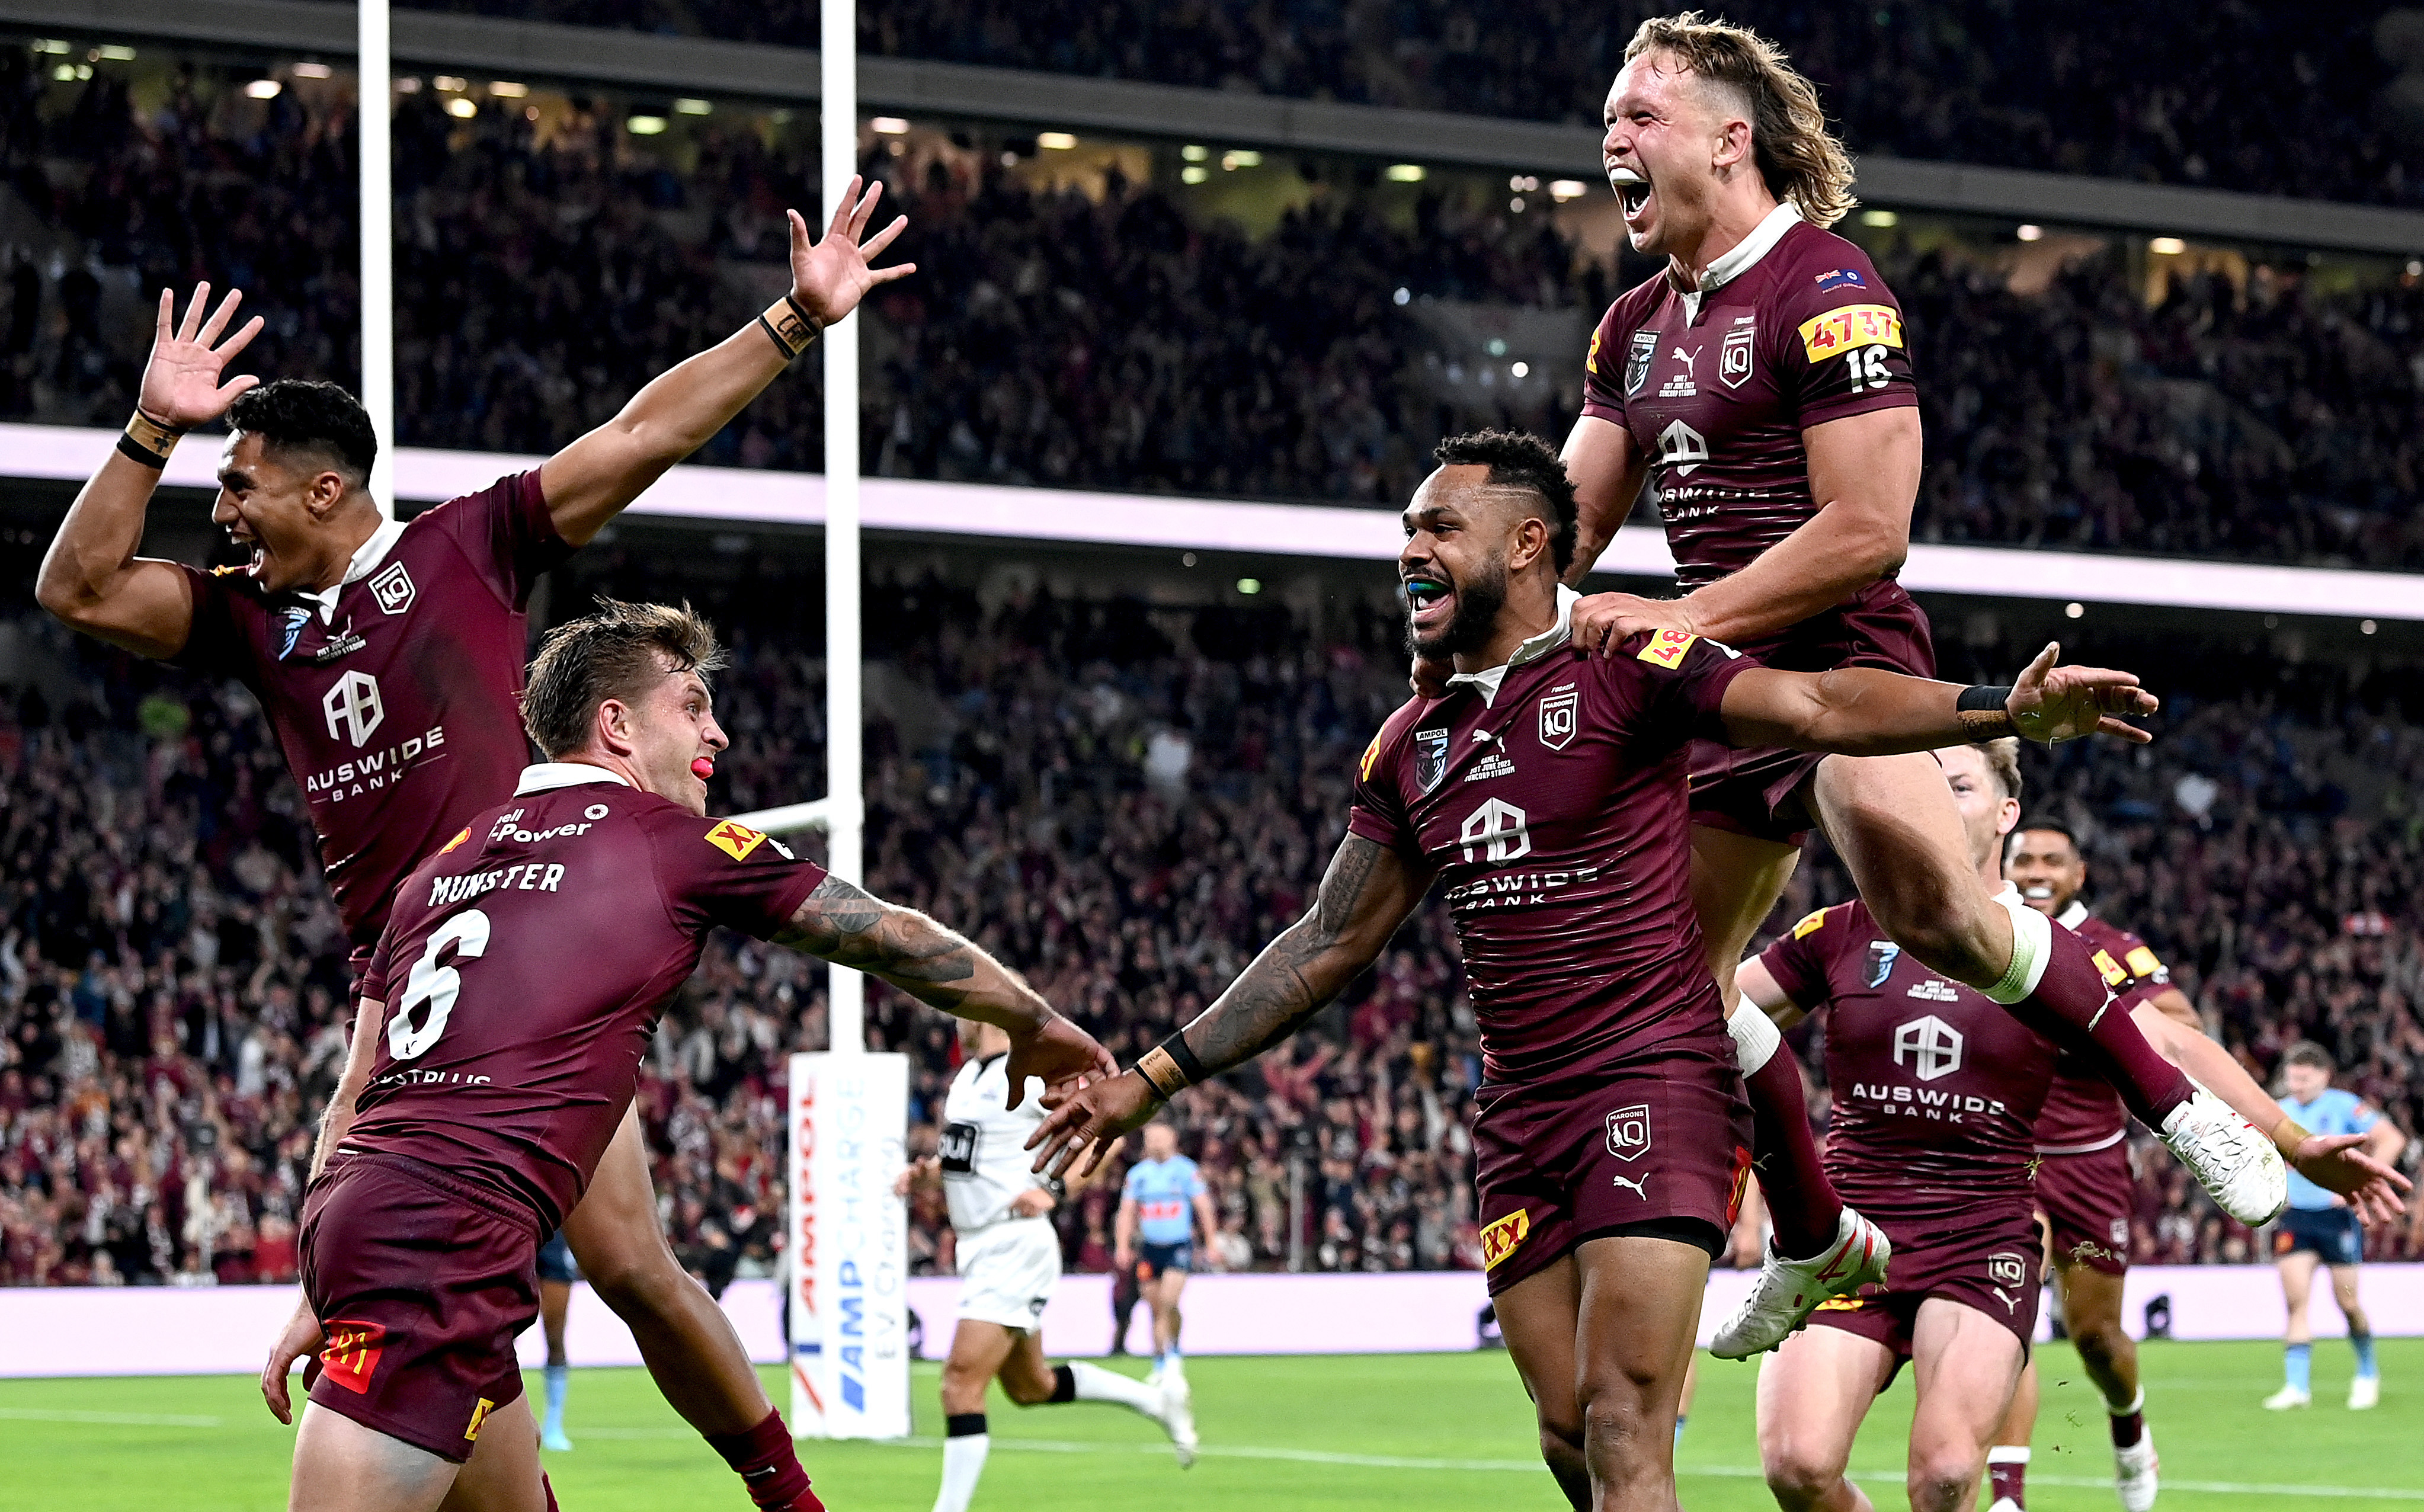 Hamiso Tabuai-Fidow of Queensland celebrates with team mates after scoring a try during game two of the State of Origin series between the Queensland Maroons and the New South Wales Blues at Suncorp Stadium on June 21, 2023 in Brisbane, Australia. (Photo by Bradley Kanaris/Getty Images)